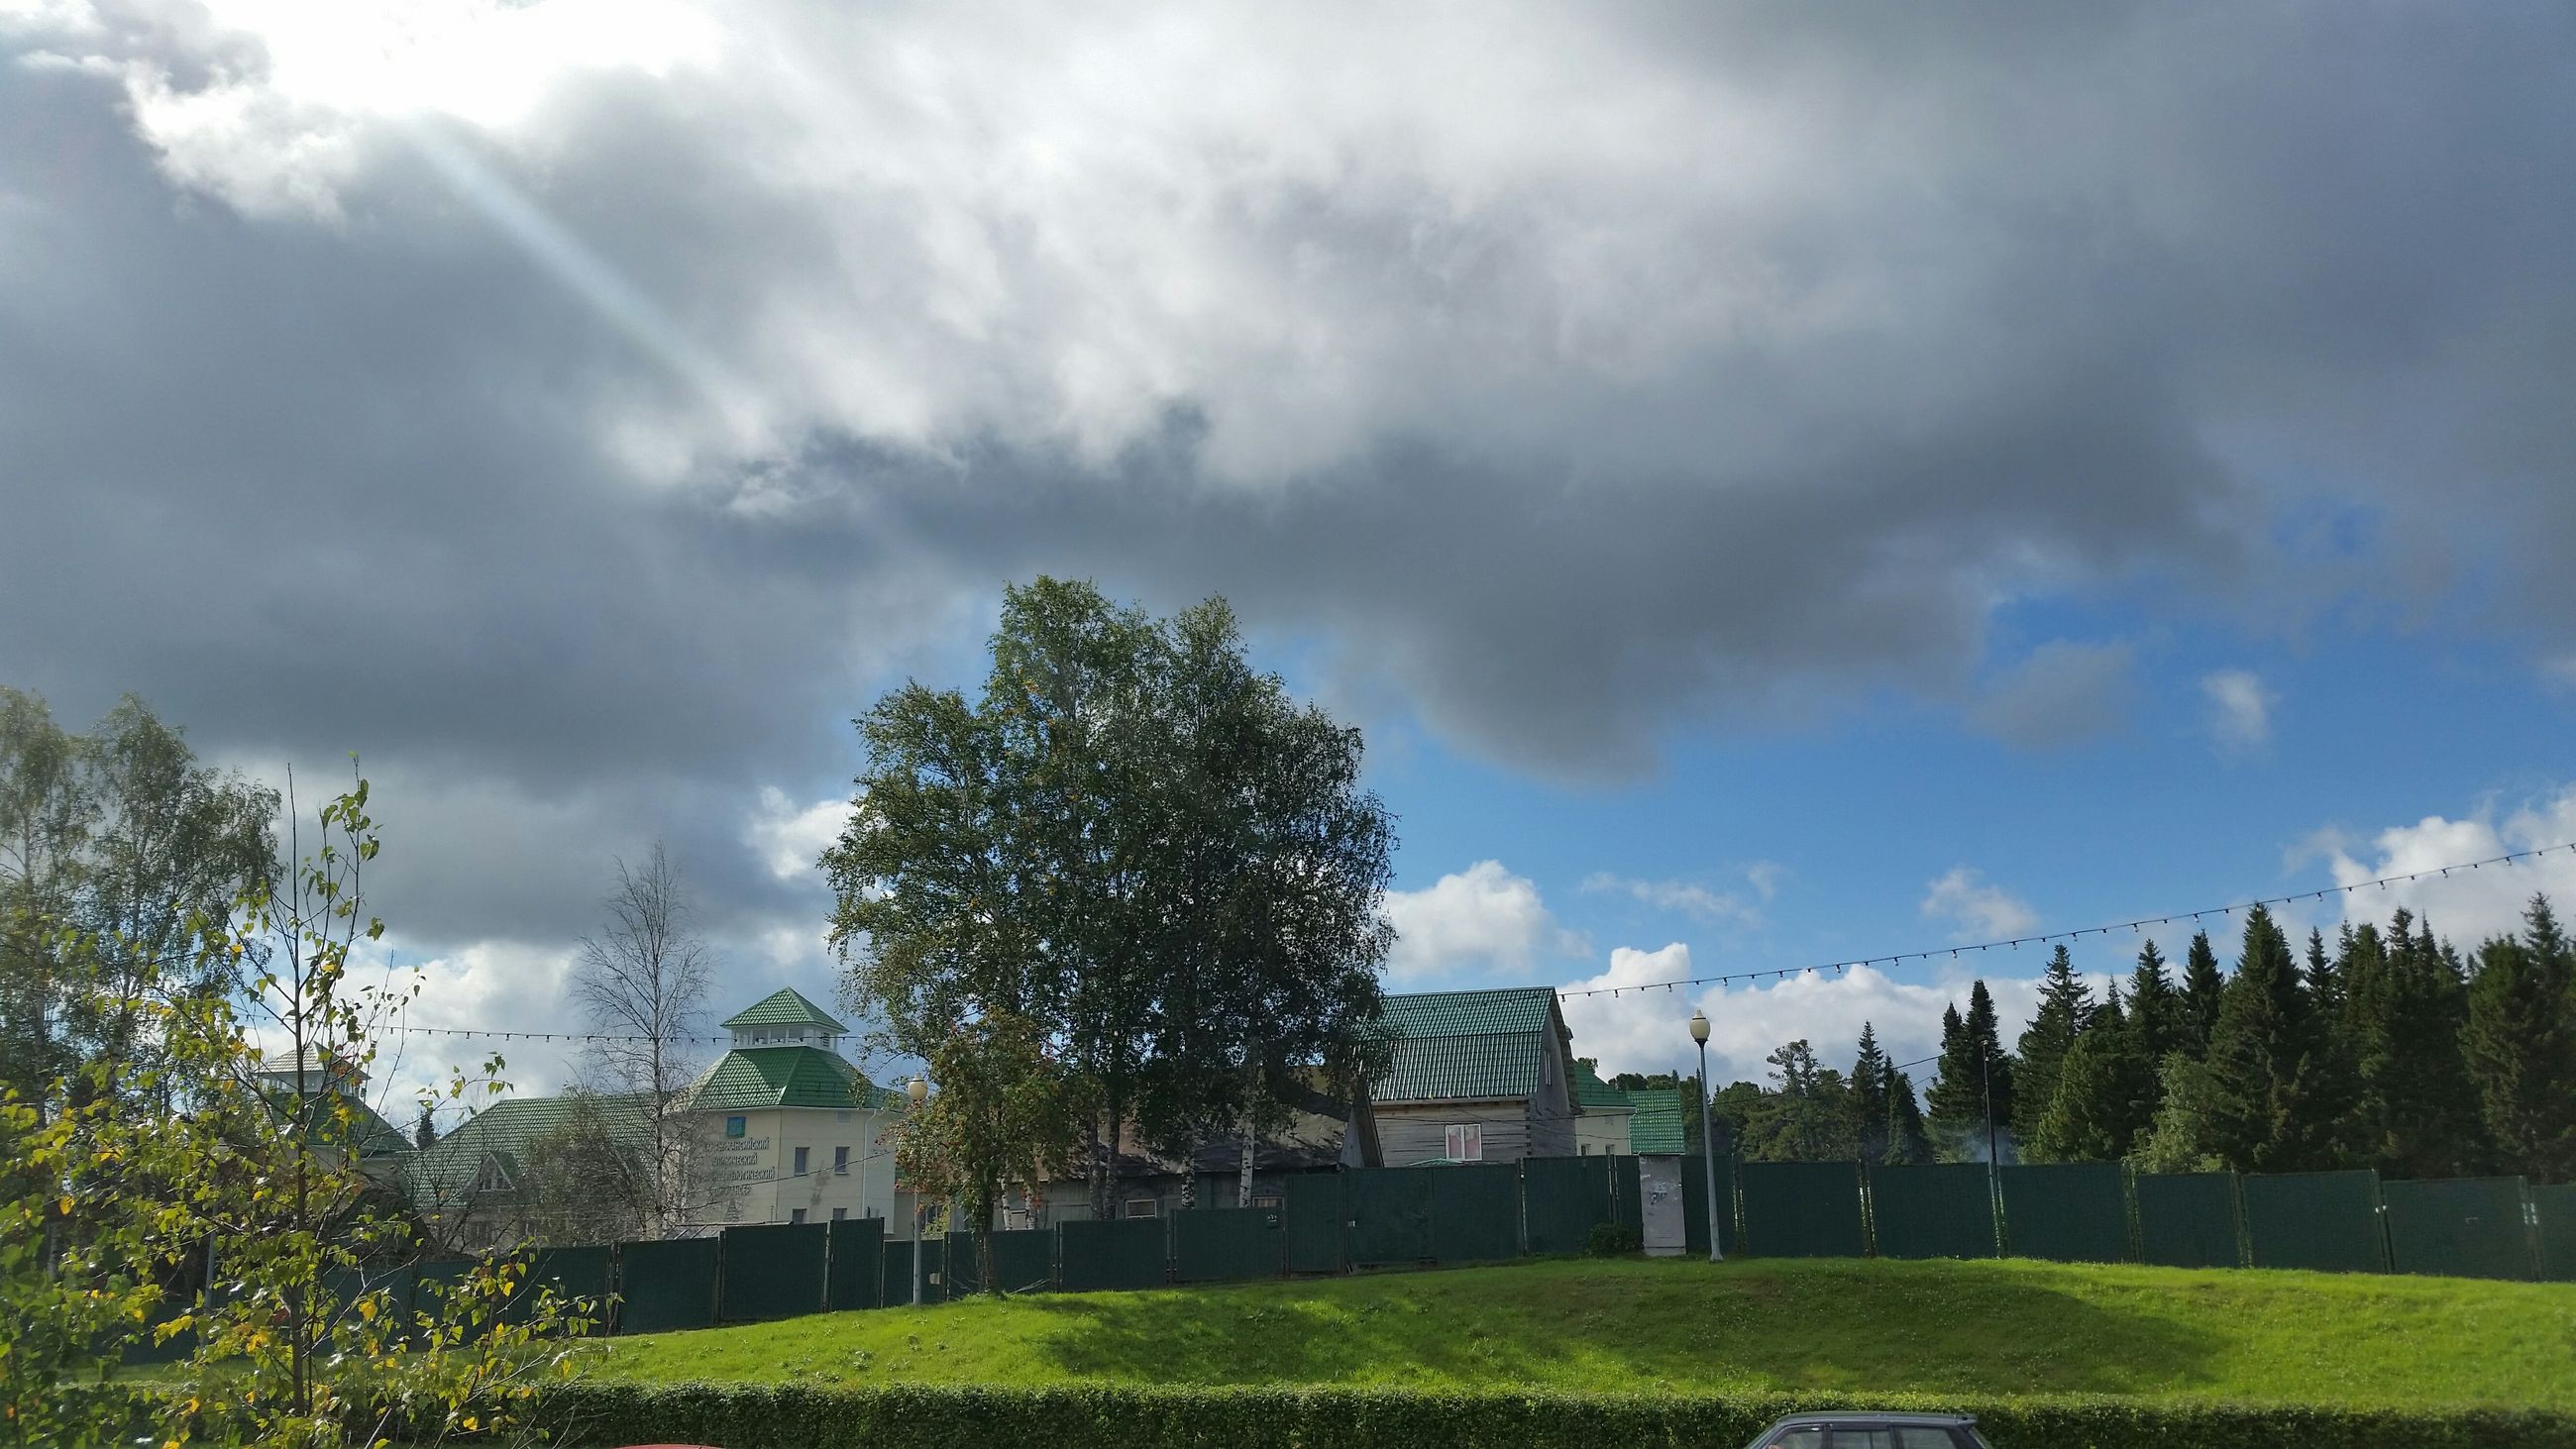 sky, tree, cloud - sky, building exterior, built structure, cloudy, architecture, cloud, grass, growth, field, nature, overcast, green color, day, park - man made space, house, weather, outdoors, lawn